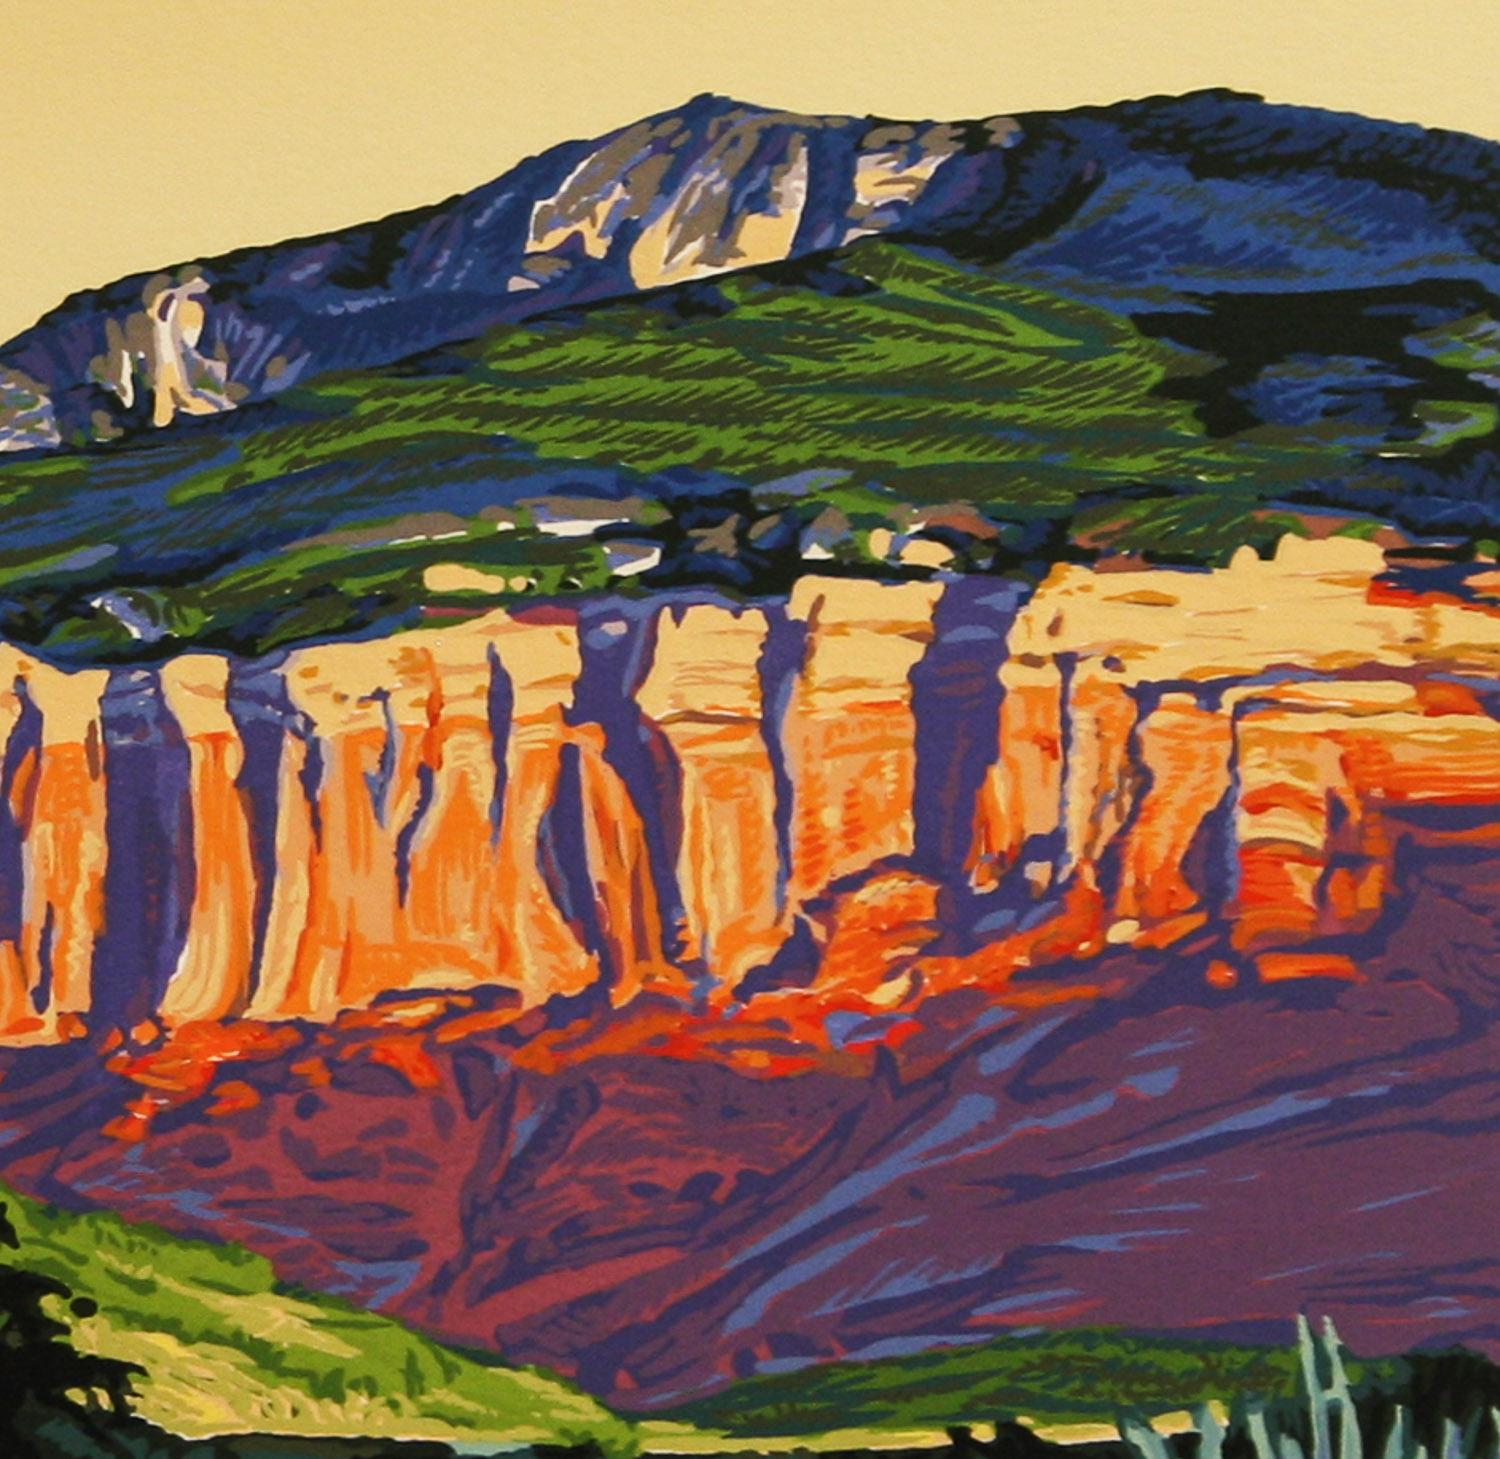     Chama Canyon is a limited edition hand-pulled serigraph no. 225 /260 in excellent condition. It is signed in pencil and published by Aspen Mountain Graphics. sheet size 14 x 18 image 12 x 16
   For American artist William Hook ( b. 1948- ) art